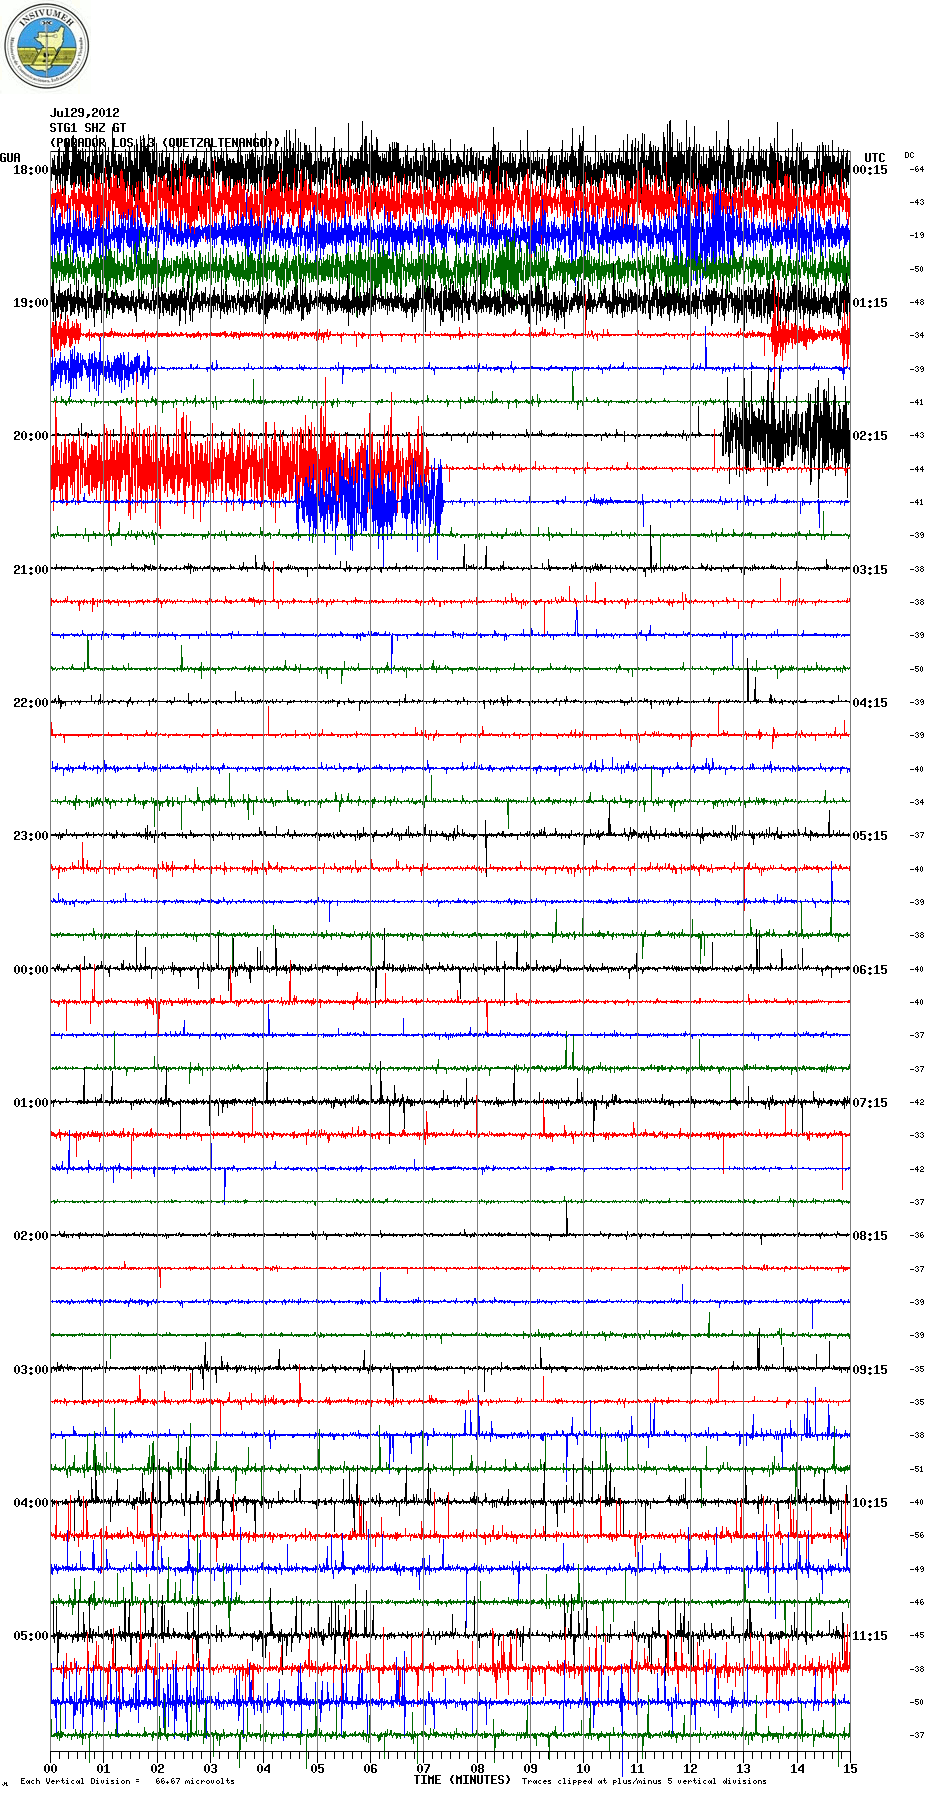 Seismic signal (Parador station) from the night 28-29 July (INSIVUMEH)